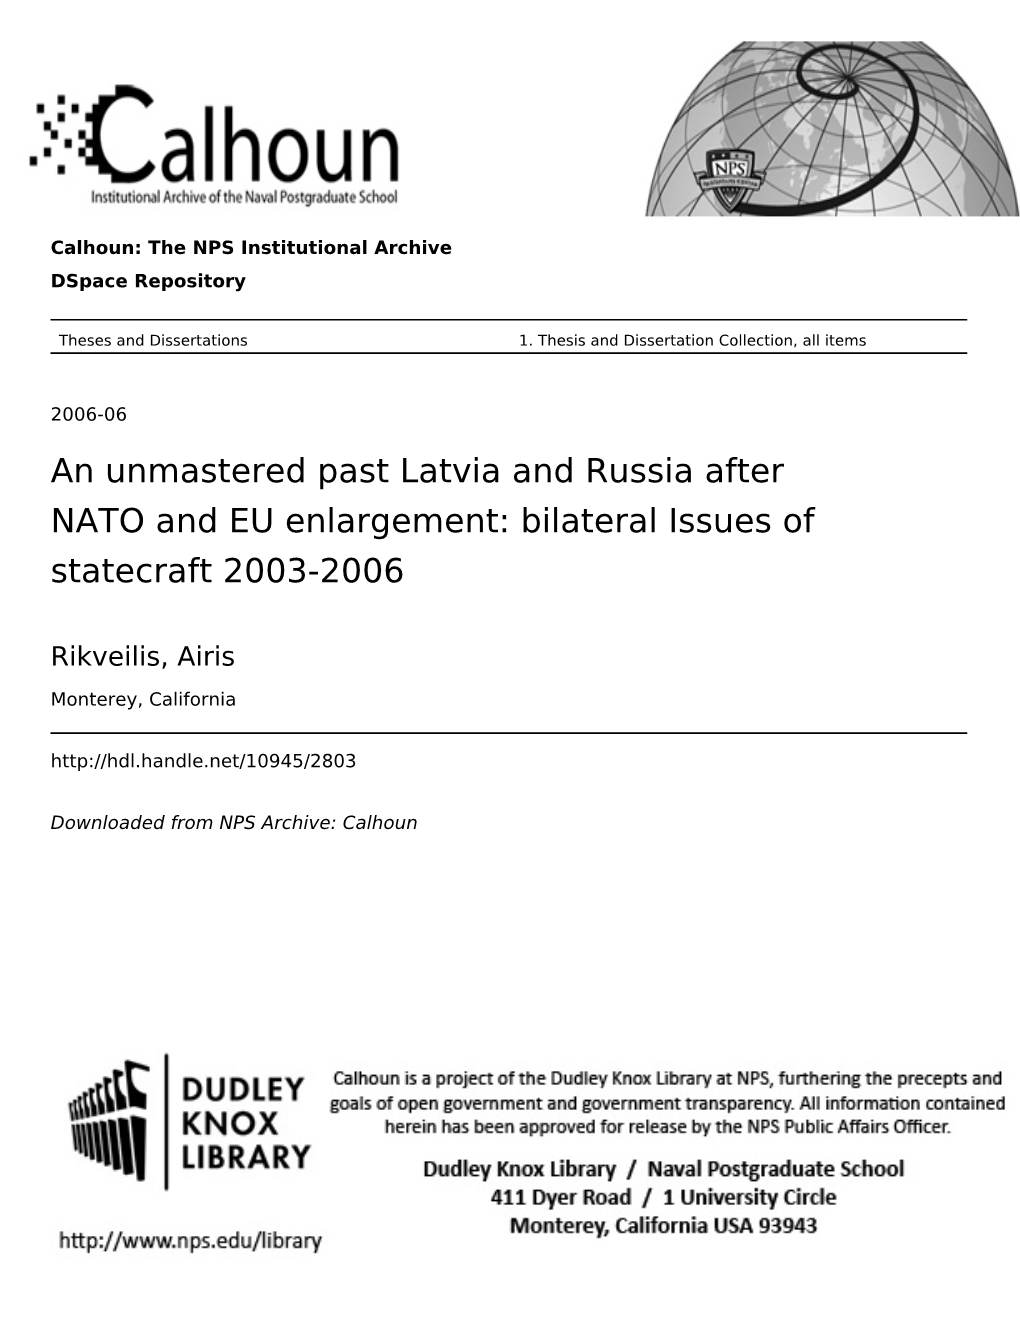 An Unmastered Past Latvia and Russia After NATO and EU Enlargement: Bilateral Issues of Statecraft 2003-2006